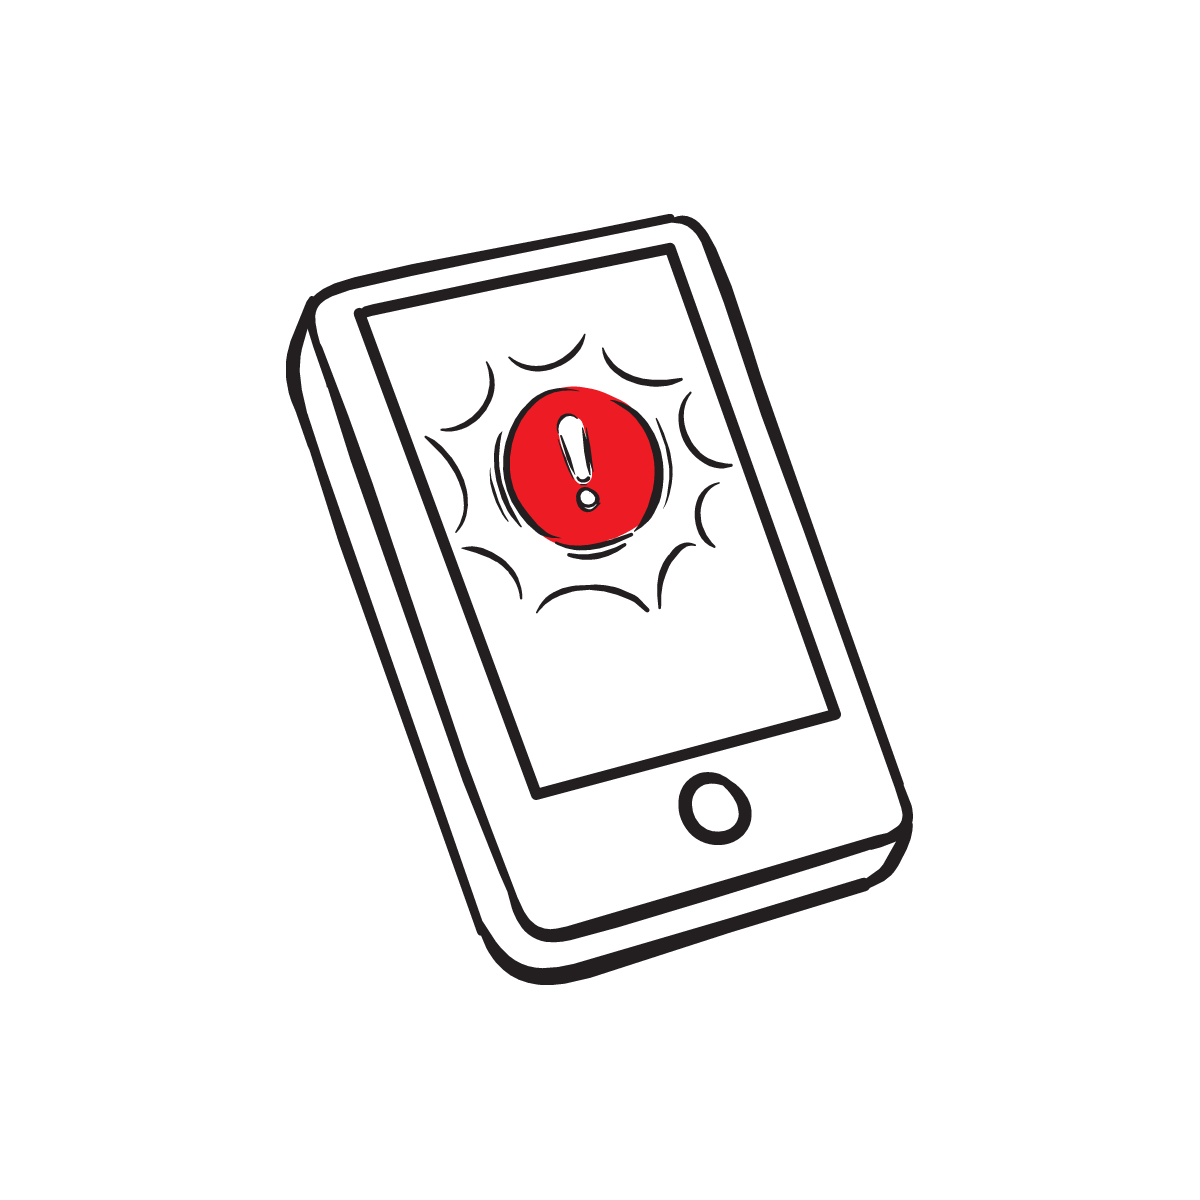 You may receive a ShakeAlert Message through a cell phone app, a wireless emergency alert (WEA) message, or through other means.